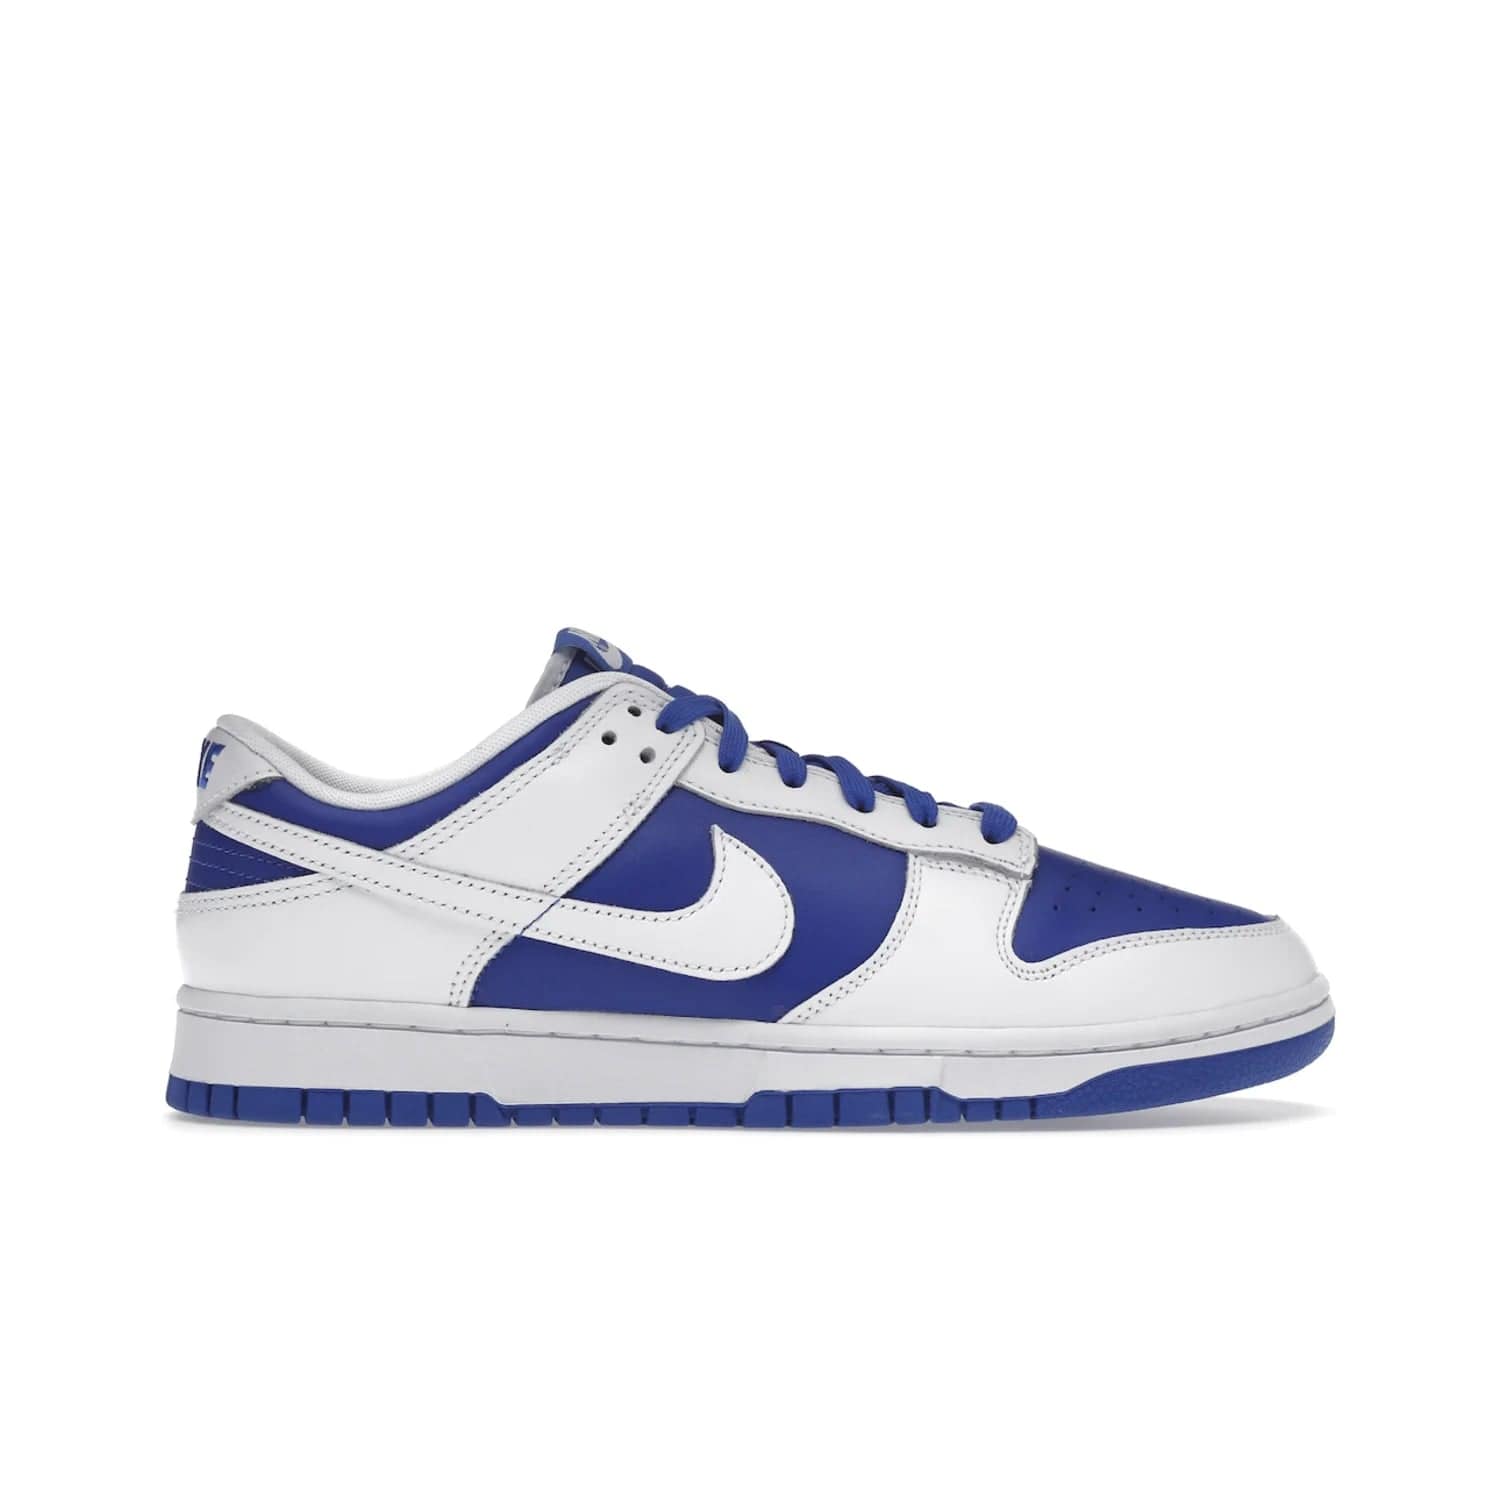 Nike Dunk Low Racer Blue White - Image 1 - Only at www.BallersClubKickz.com - Sleek Racer Blue leather upper and white leather overlays make up the Nike Dunk Low Racer Blue White. Woven tag and heel embroidery for a 1985 Dunk look with a matching EVA foam sole completes the classic colorway.